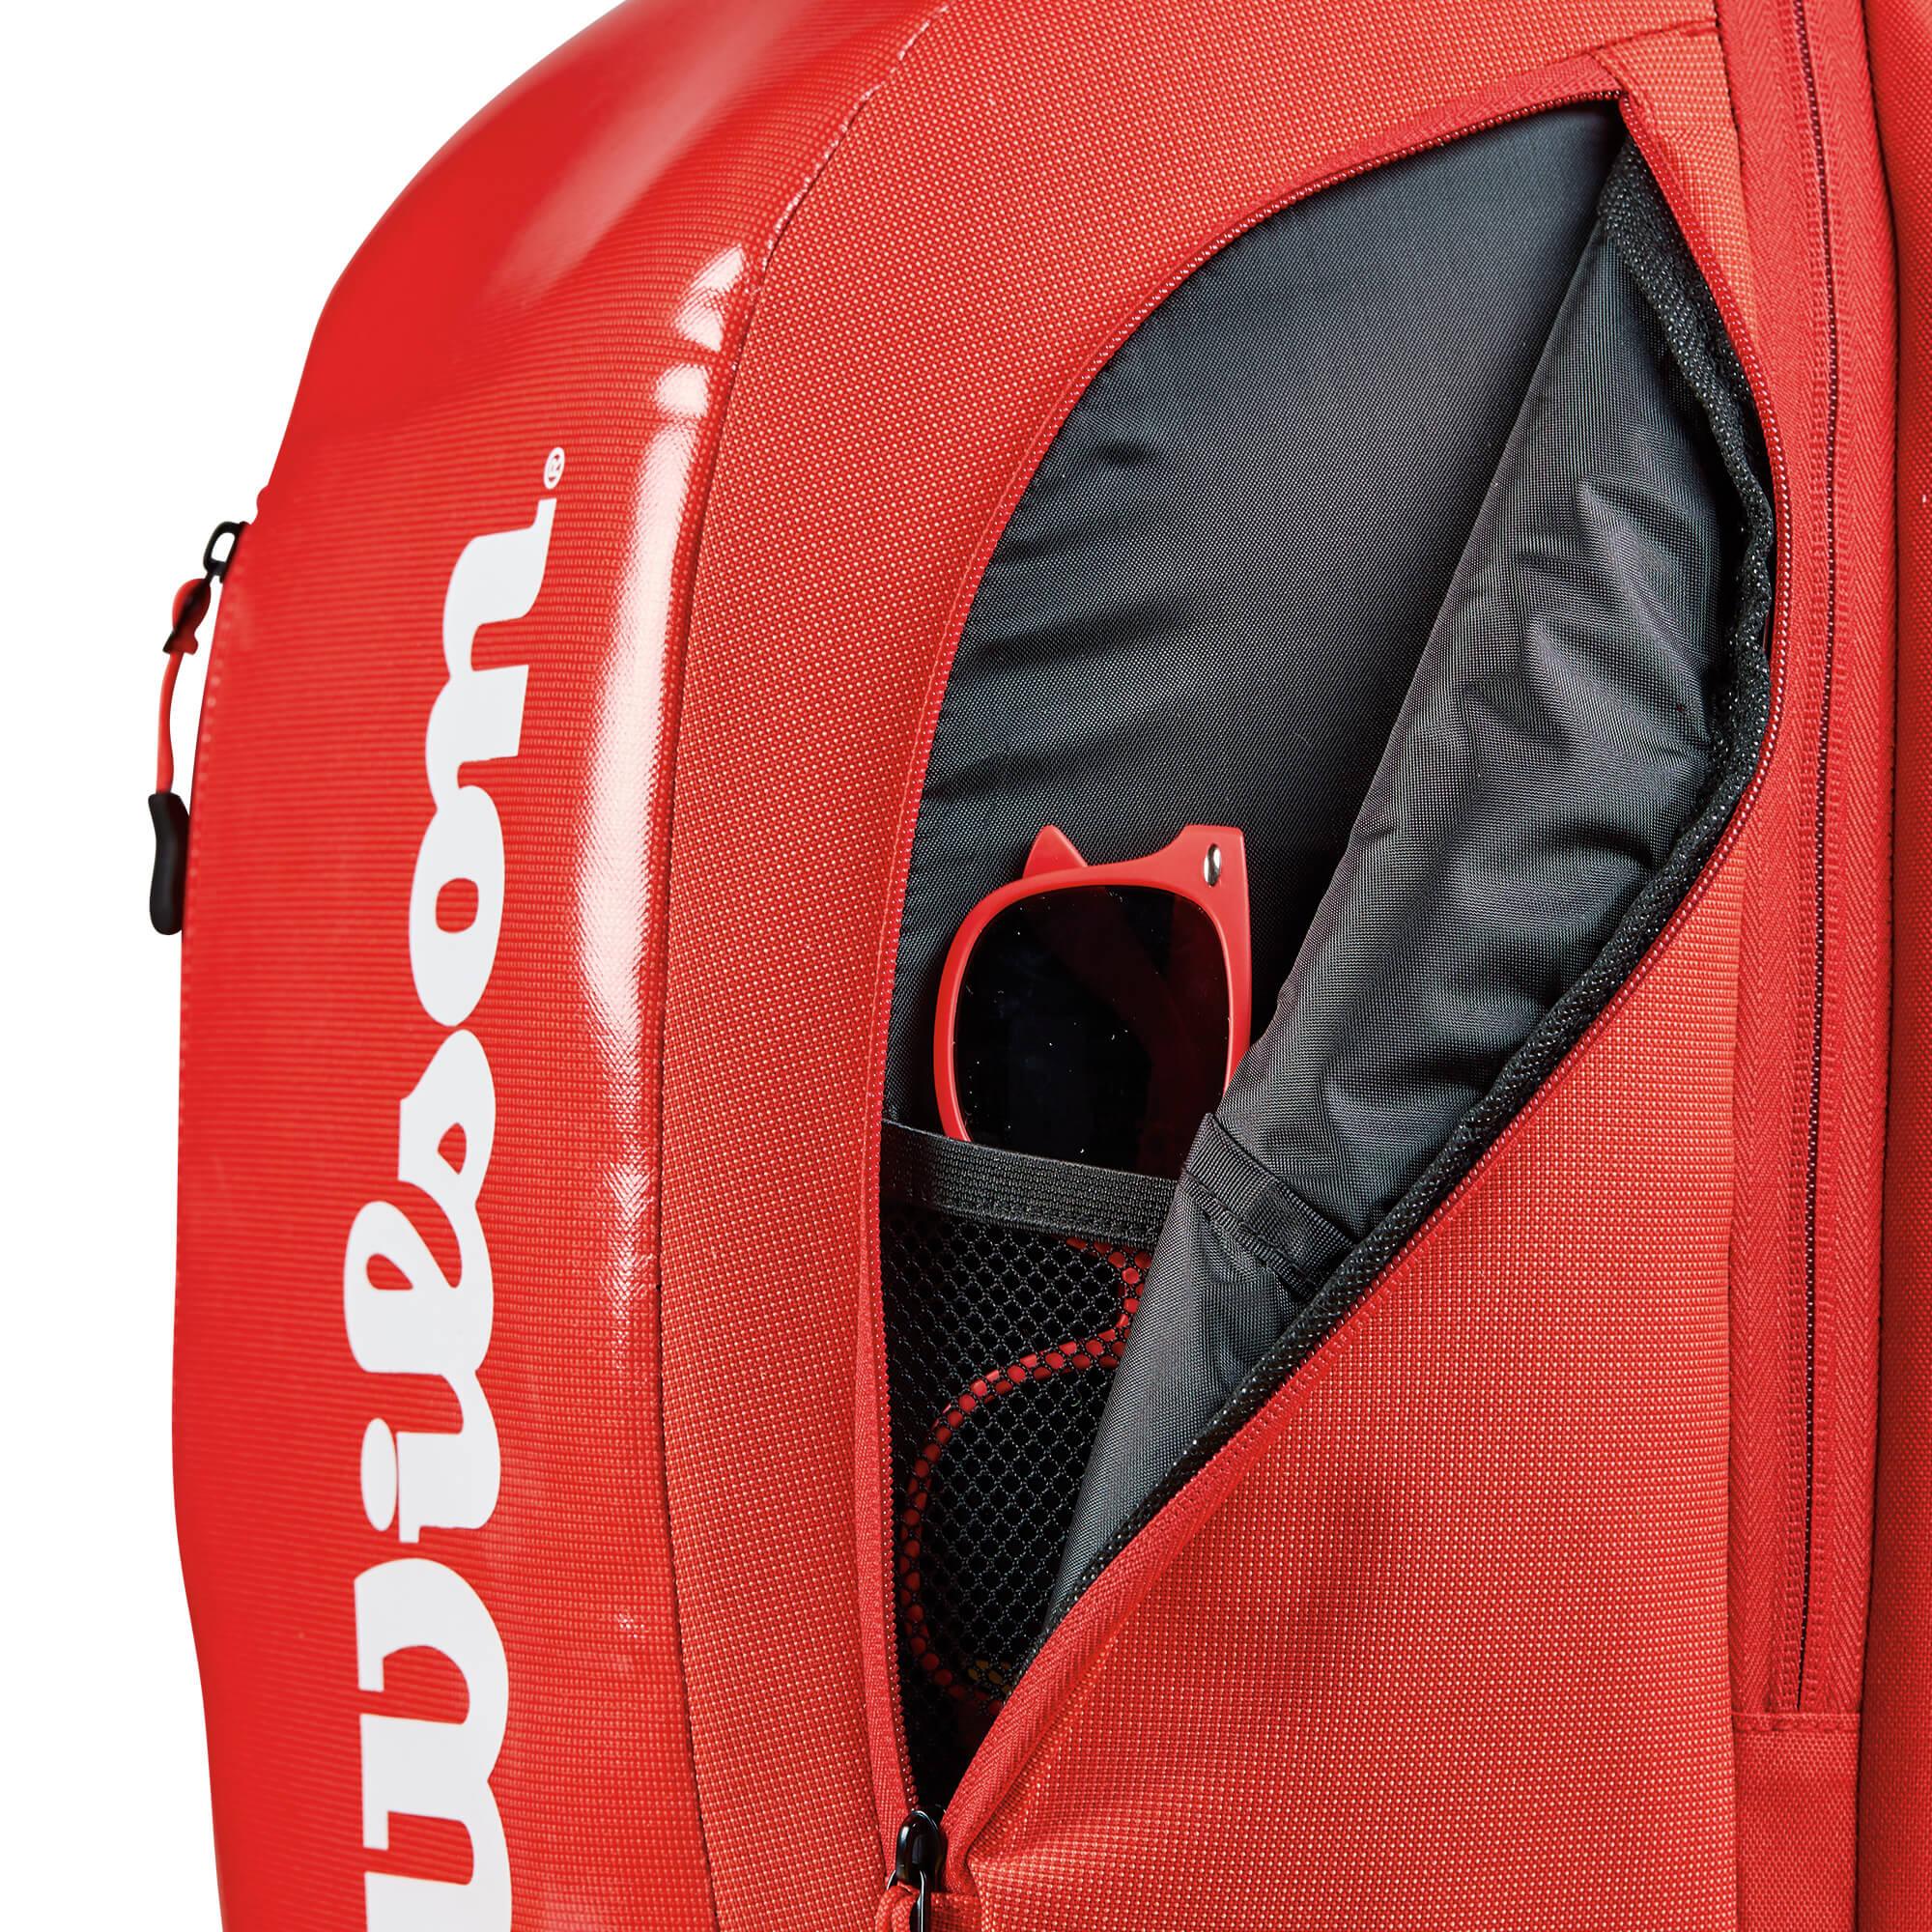 wilson super tour backpack red